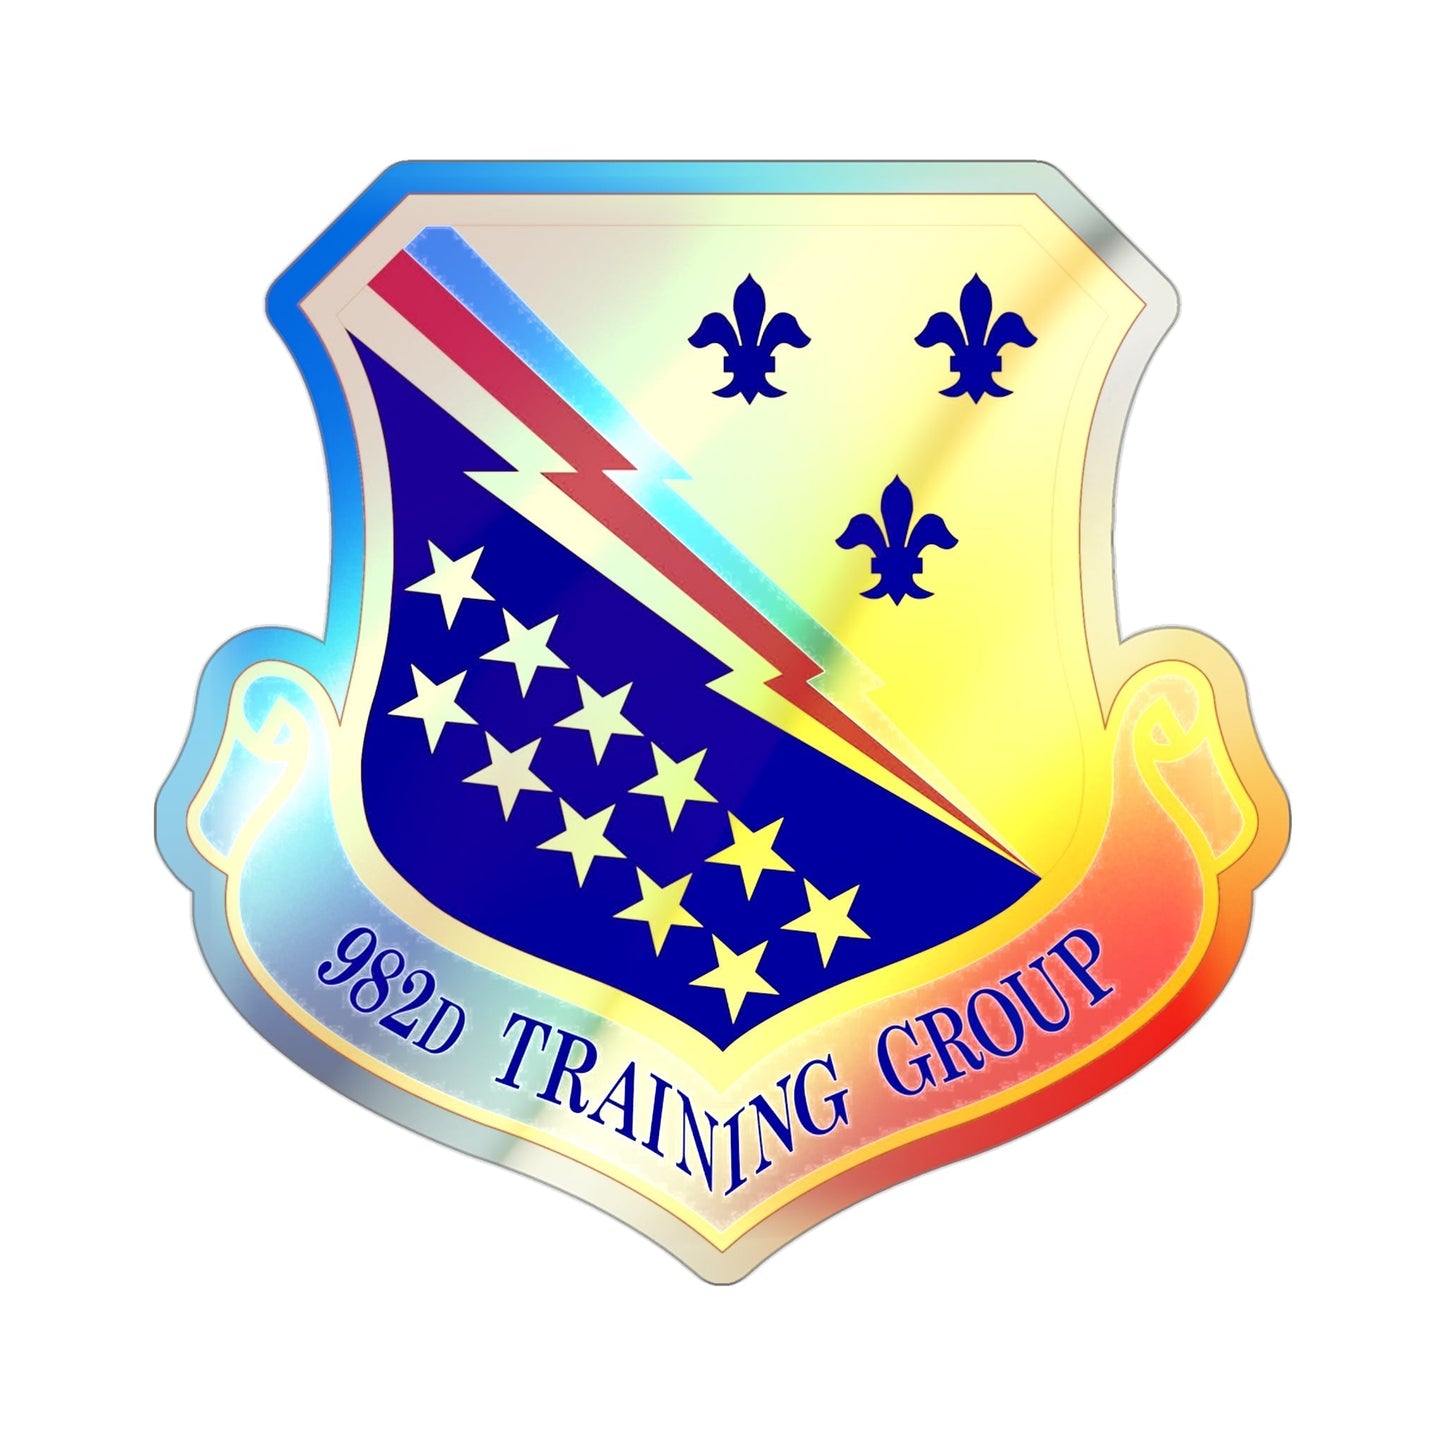 982d Training Group (U.S. Air Force) Holographic STICKER Die-Cut Vinyl Decal-3 Inch-The Sticker Space